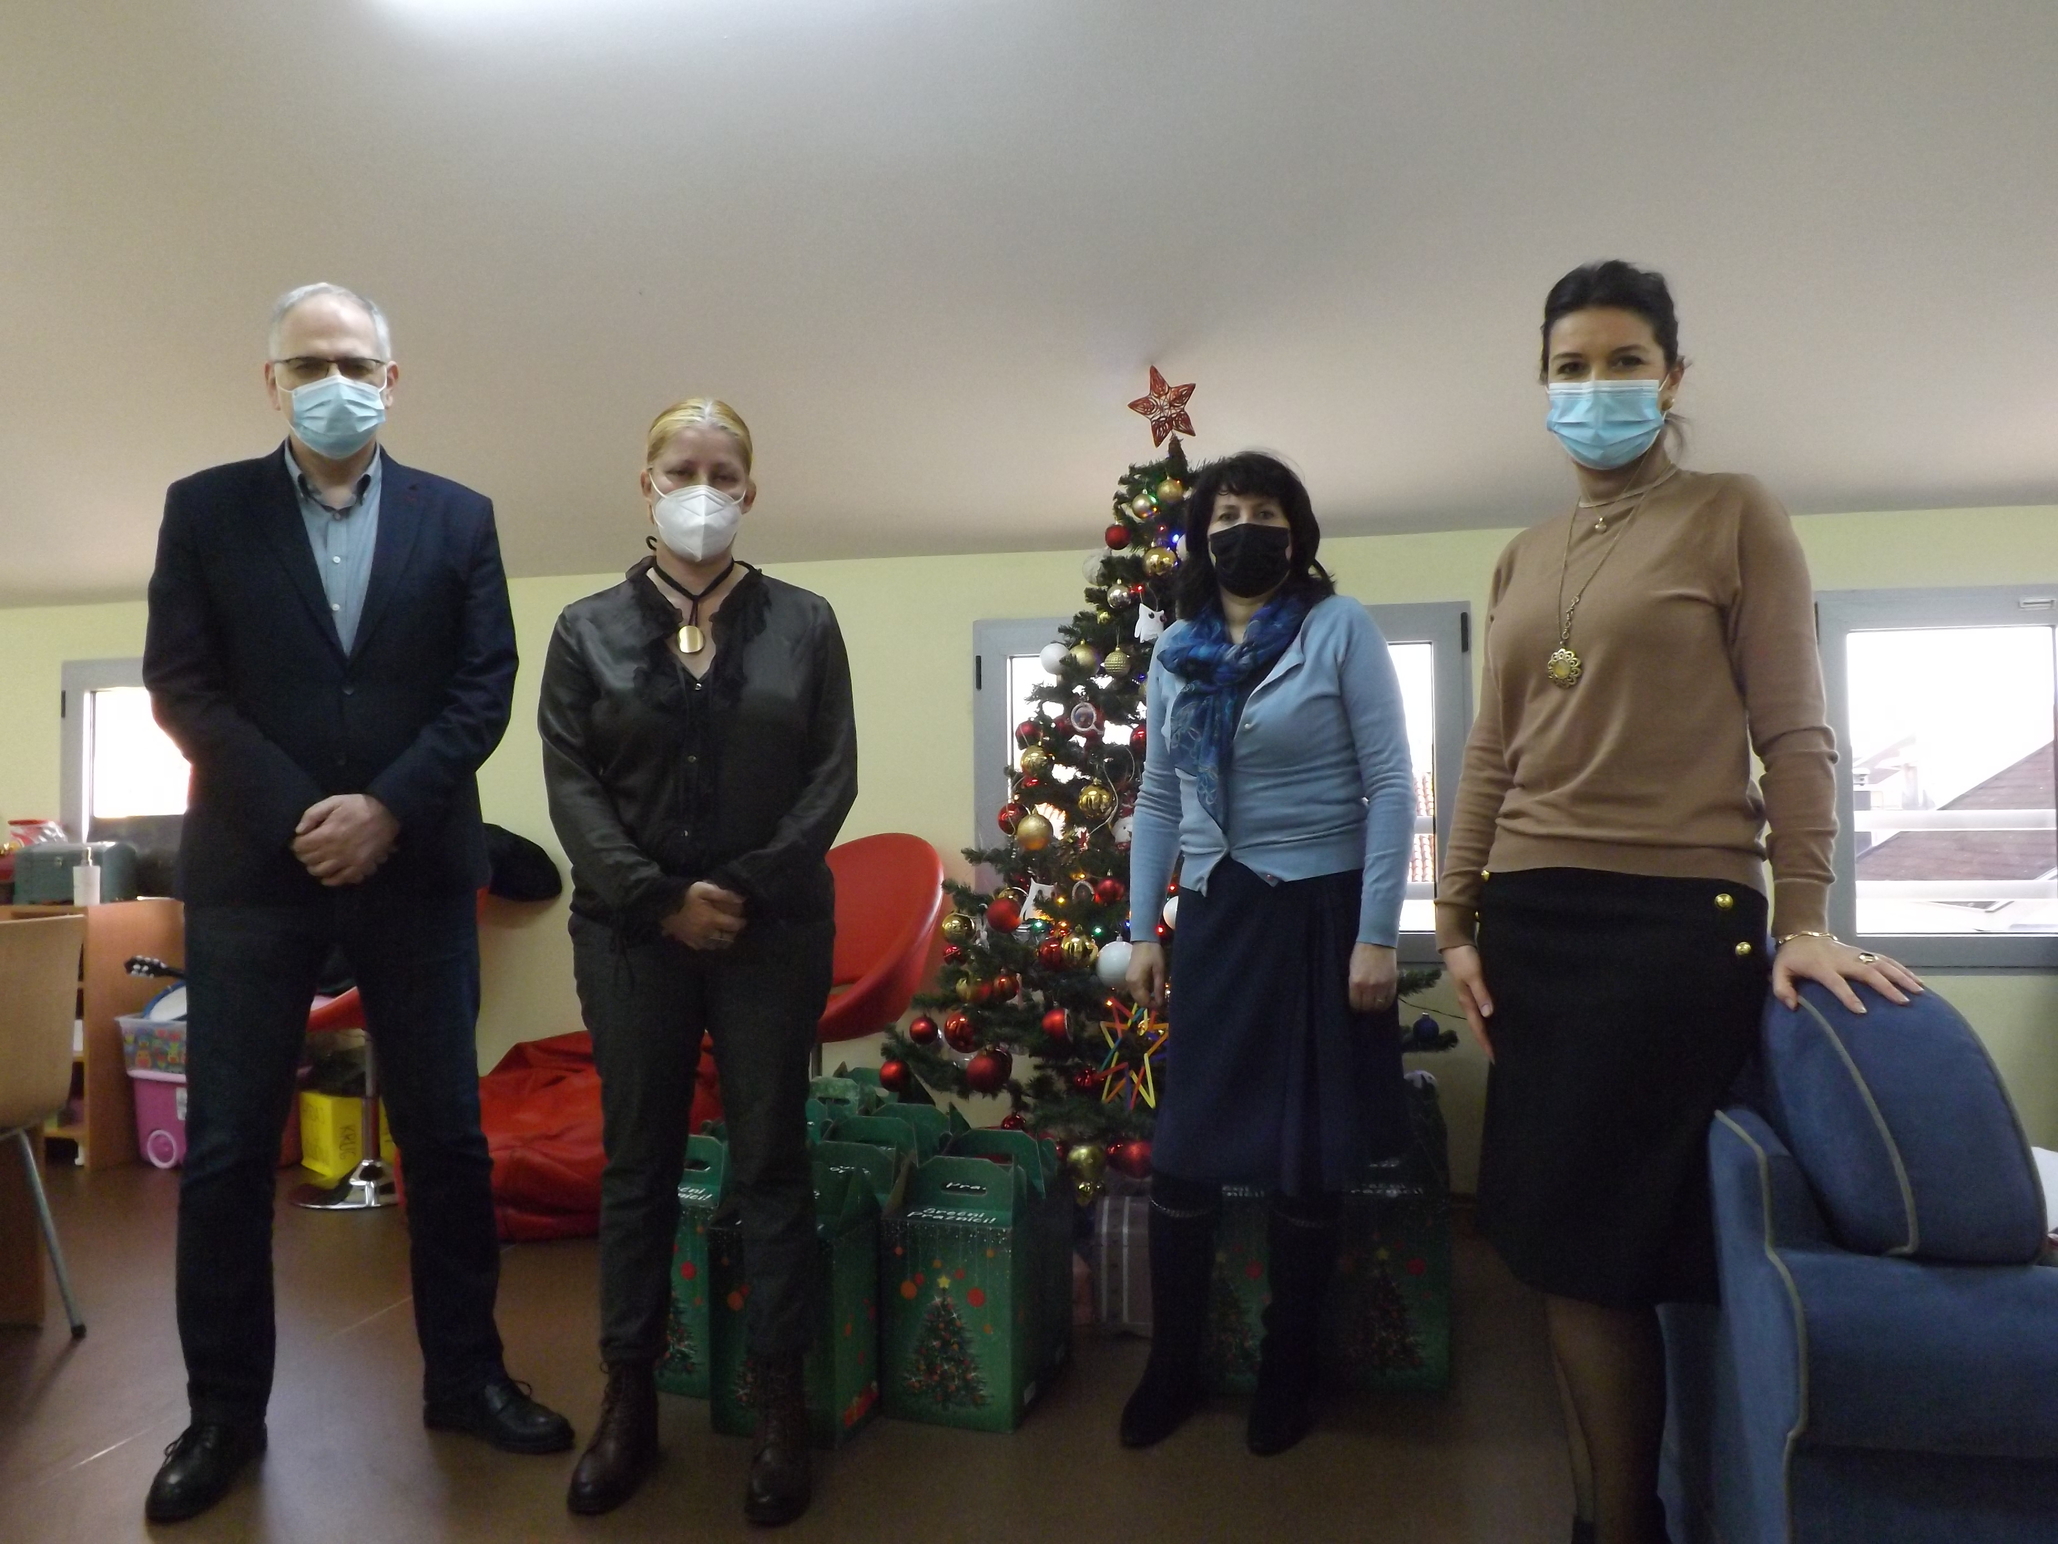 Representatives of the Secretariat for Social Welfare and the Center for the Rights of the Child presented New Year's packages to the Day Care Center for Children and Youth with intellectual and developmental disabilities